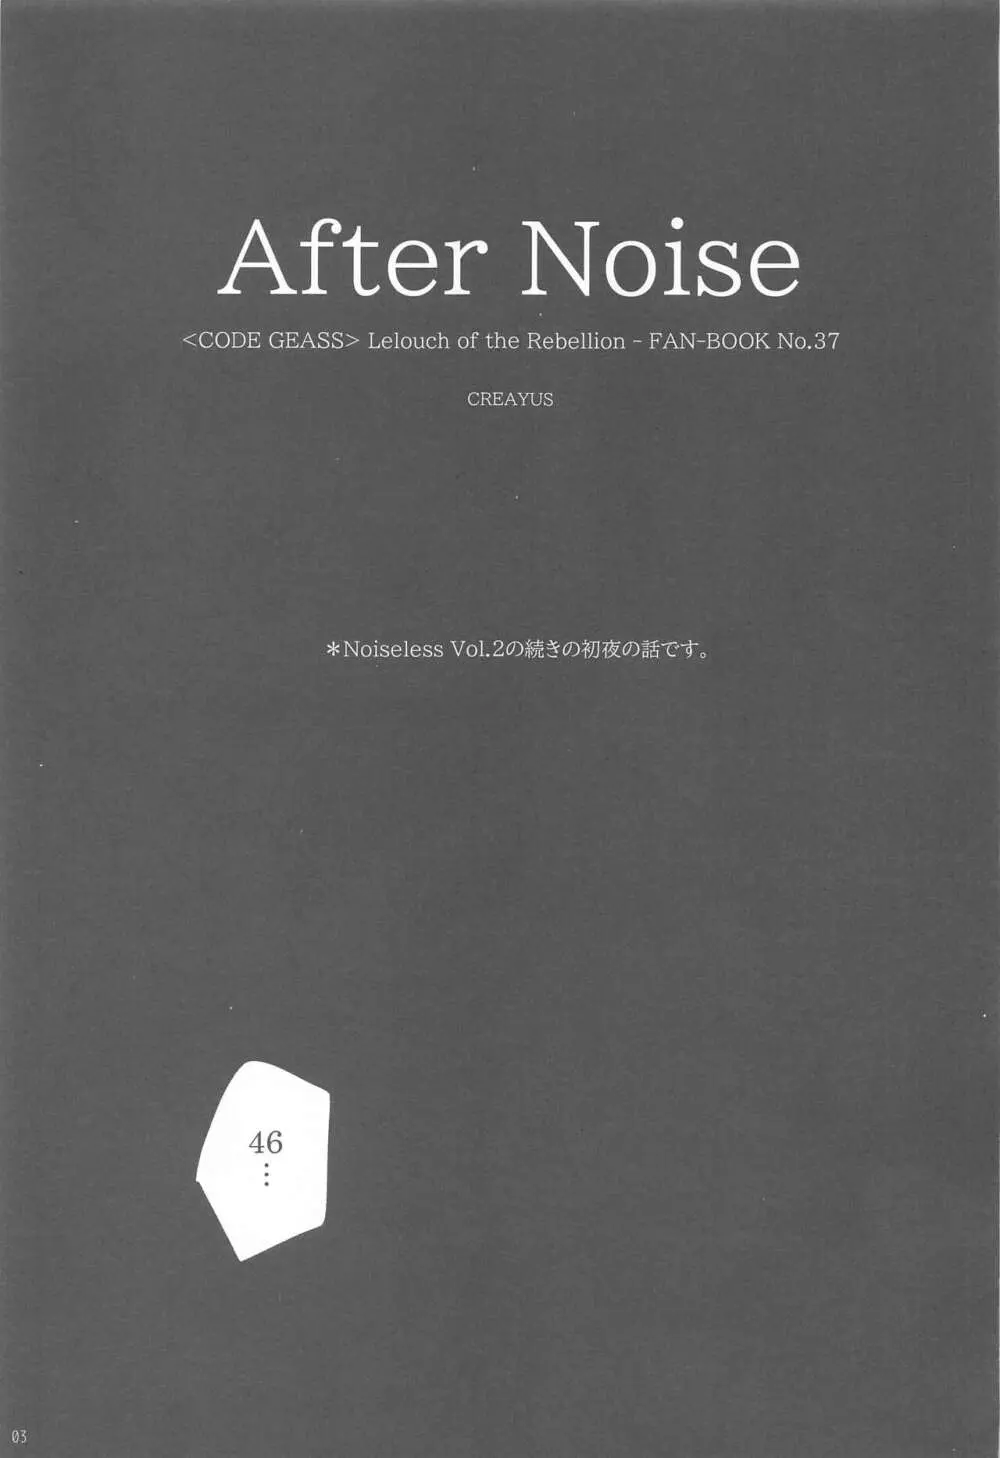 After Noise